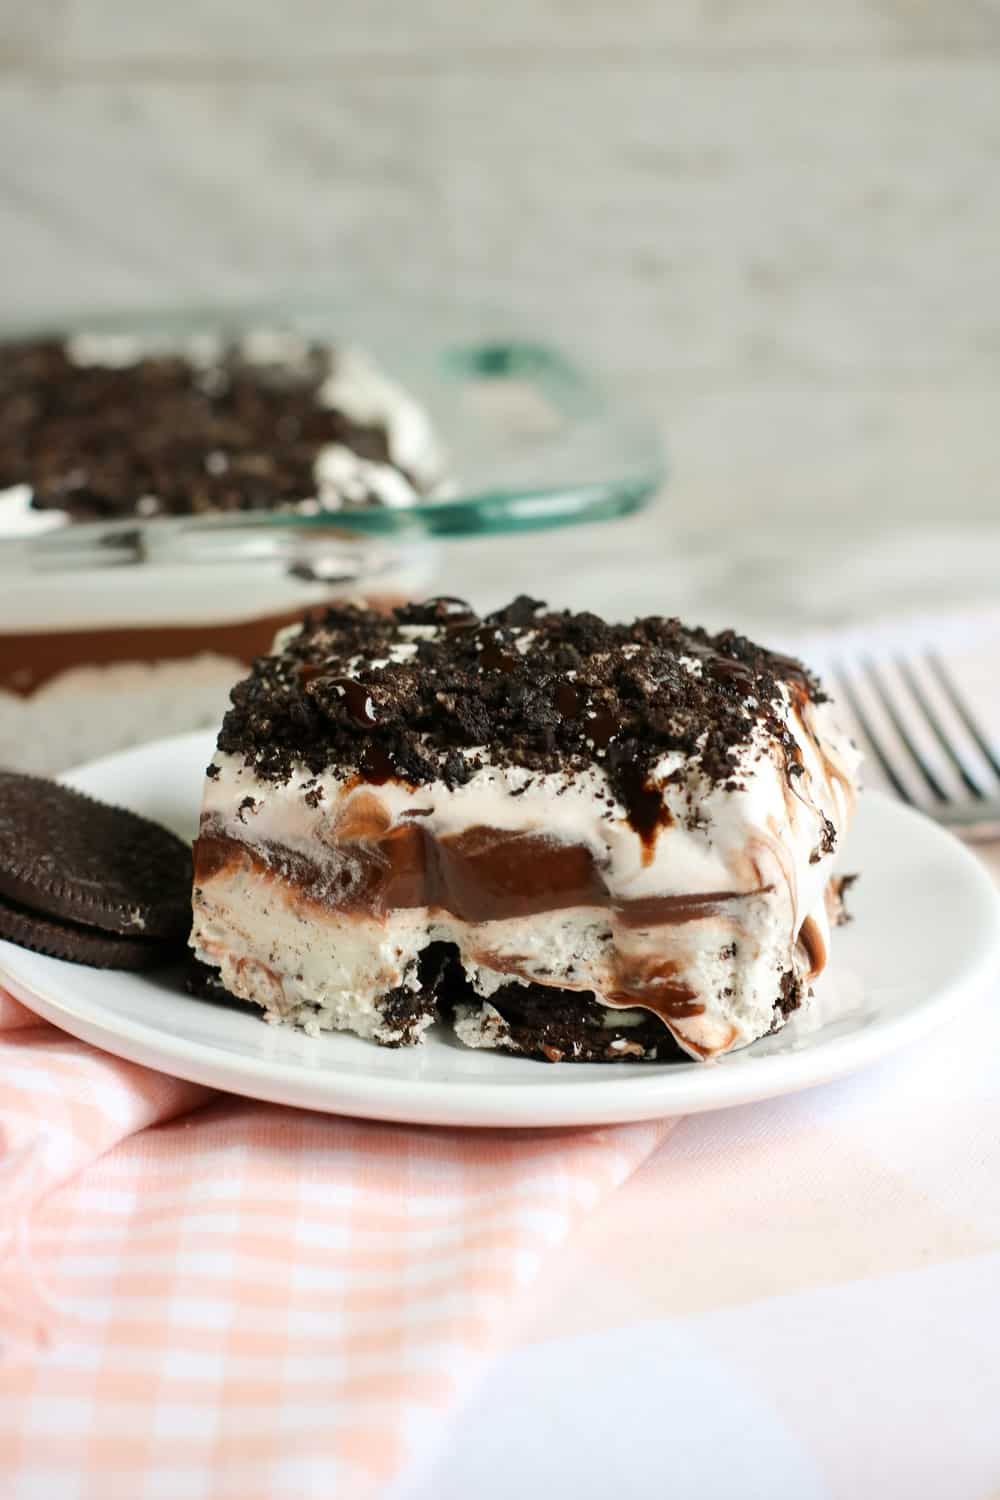 What I love about this recipe is that you don’t need to drag out any special equipment to make it. Just a hand-held mixer will do the trick to beat the cream cheese and powdered sugar together. You can even use just a whisk to beat the pudding and milk together and then let it sit to thicken. The Oreo crust is just a layer of cookies you’ll line your pan with. You don’t even need to crush this layer; save that for when you’re ready to garnish the top of the Oreo Cookie Delight with them. via @Mooreorlesscook